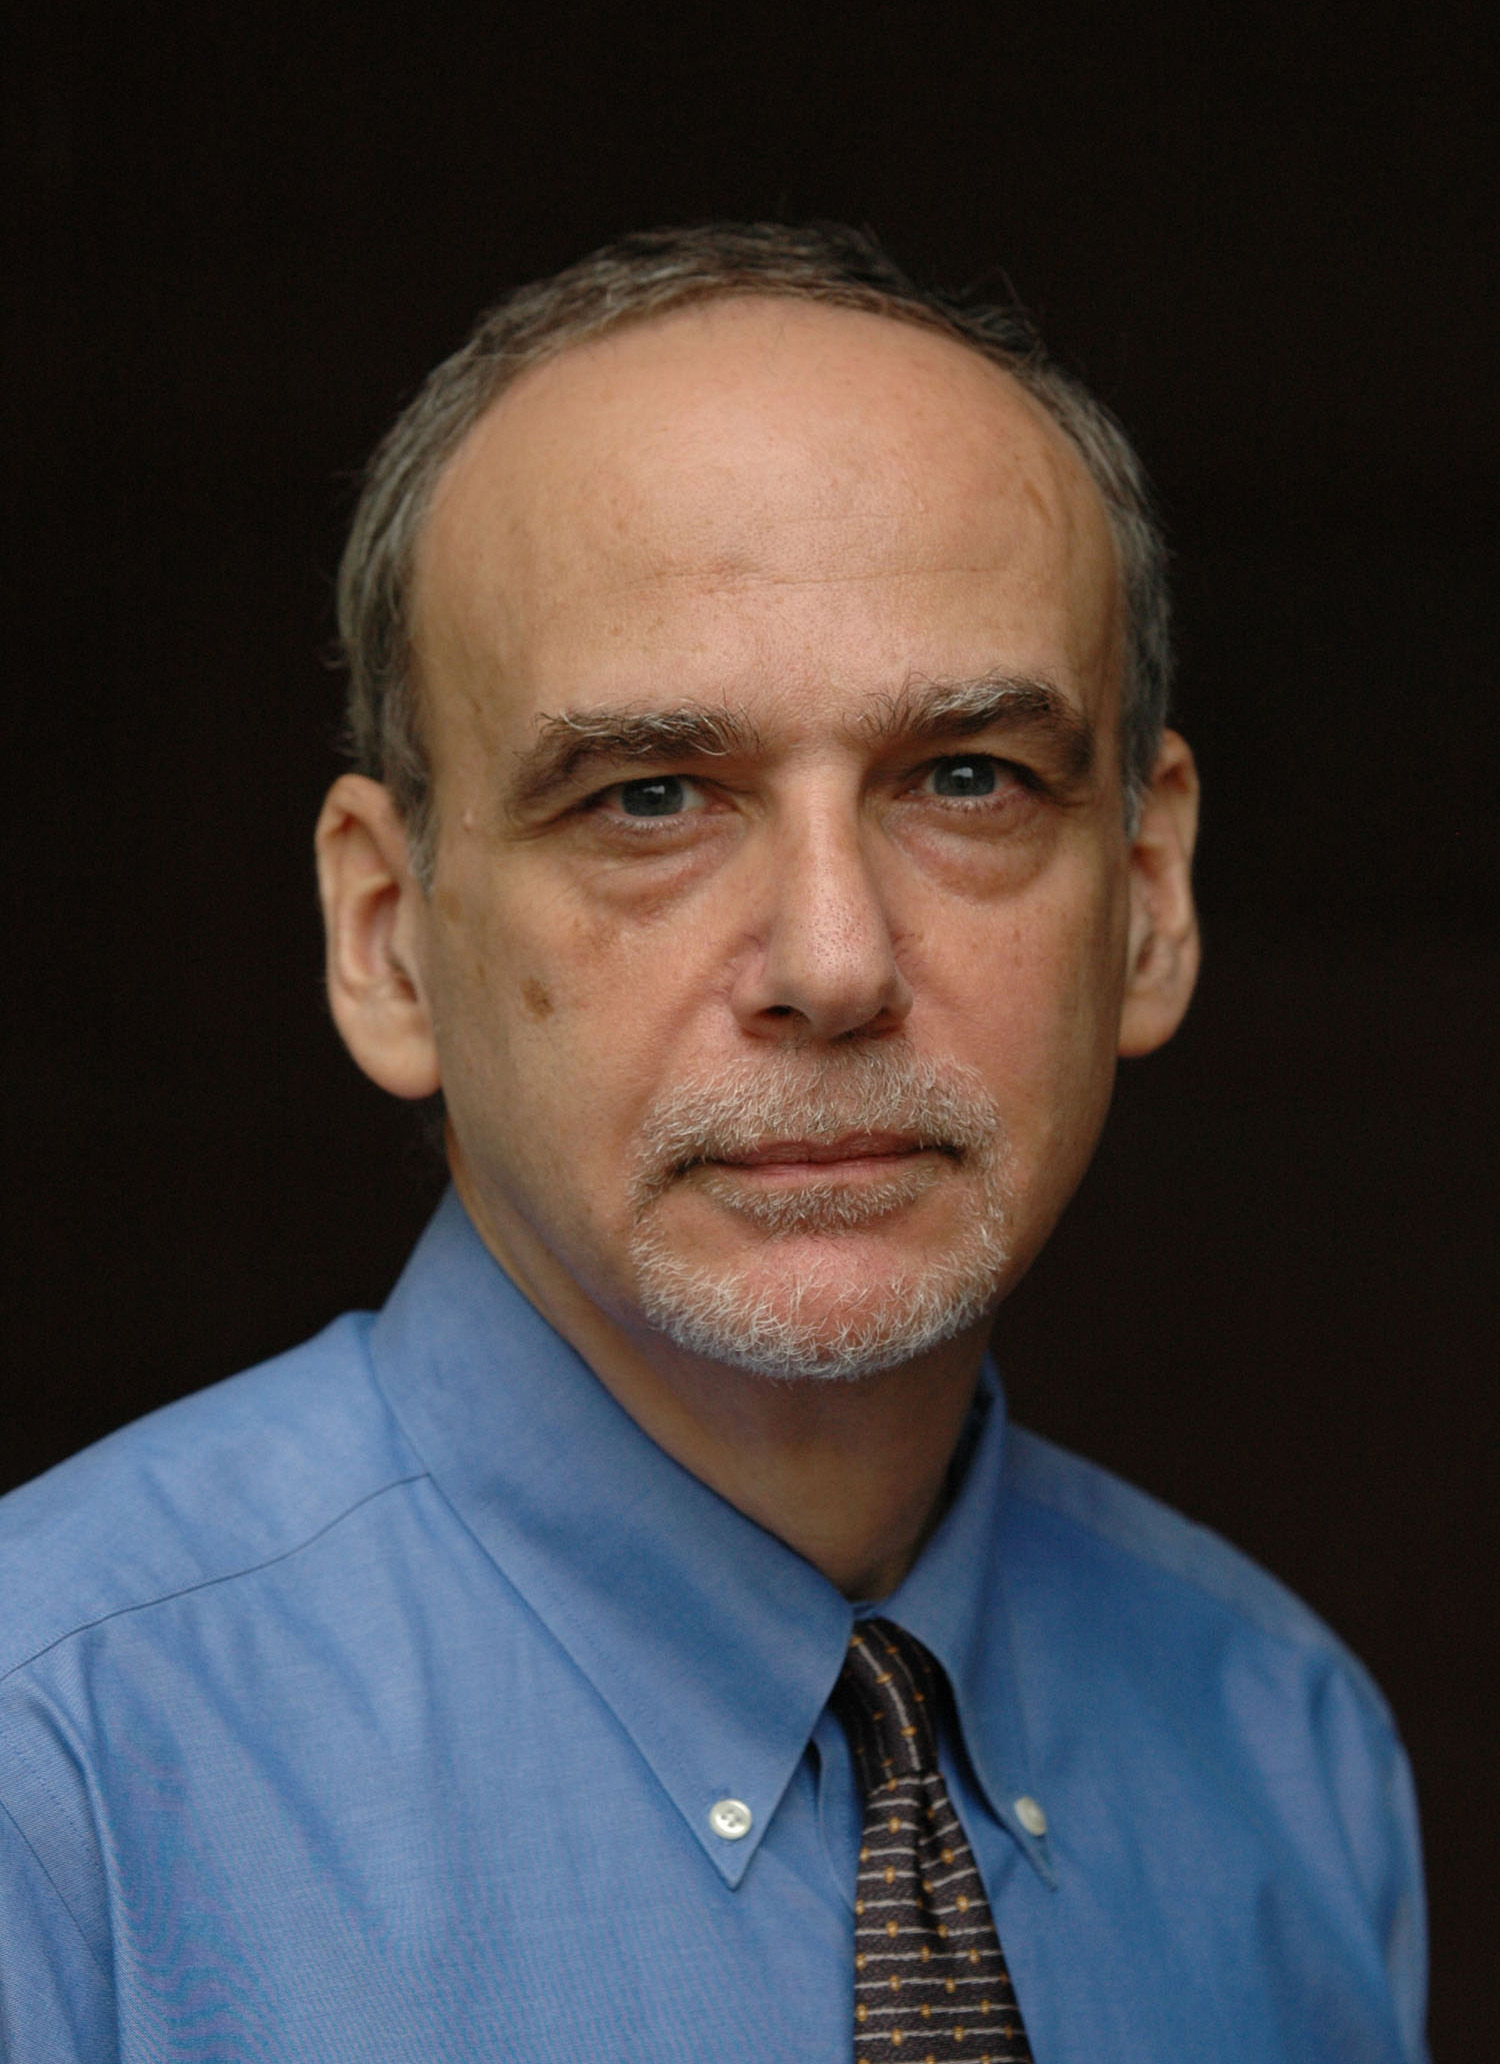 A man wearing a blue shirt and tie looks directly at the camera; behind him there is a black background.